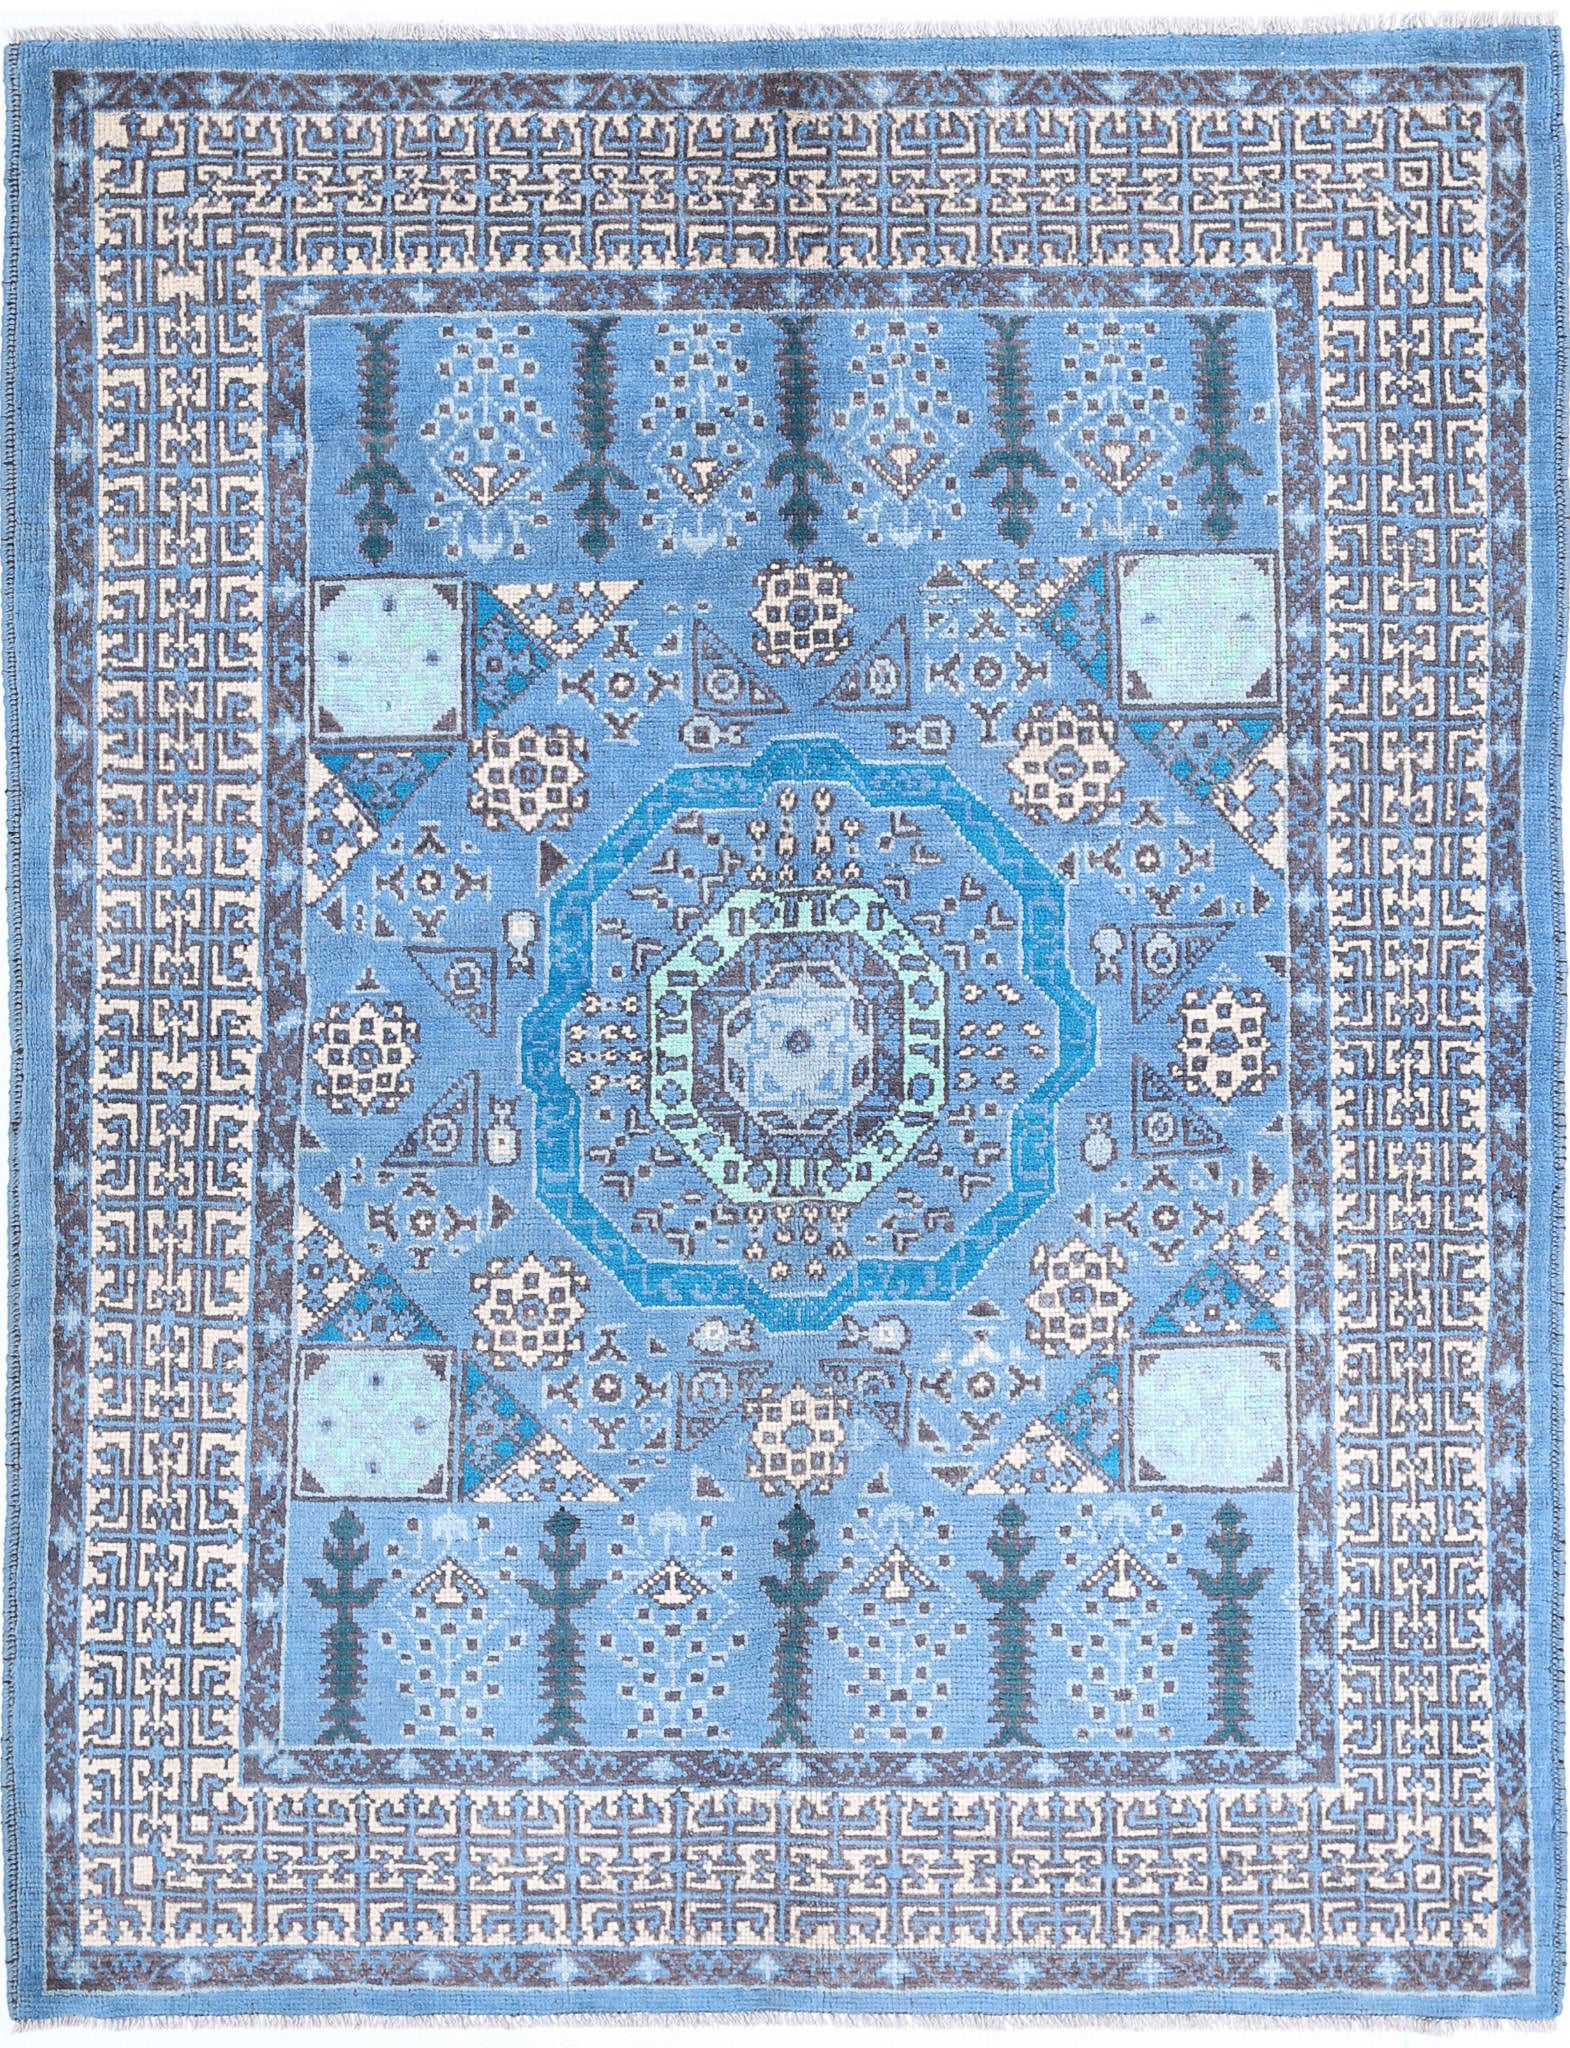 Revival-hand-knotted-qarghani-wool-rug-5014099.jpg